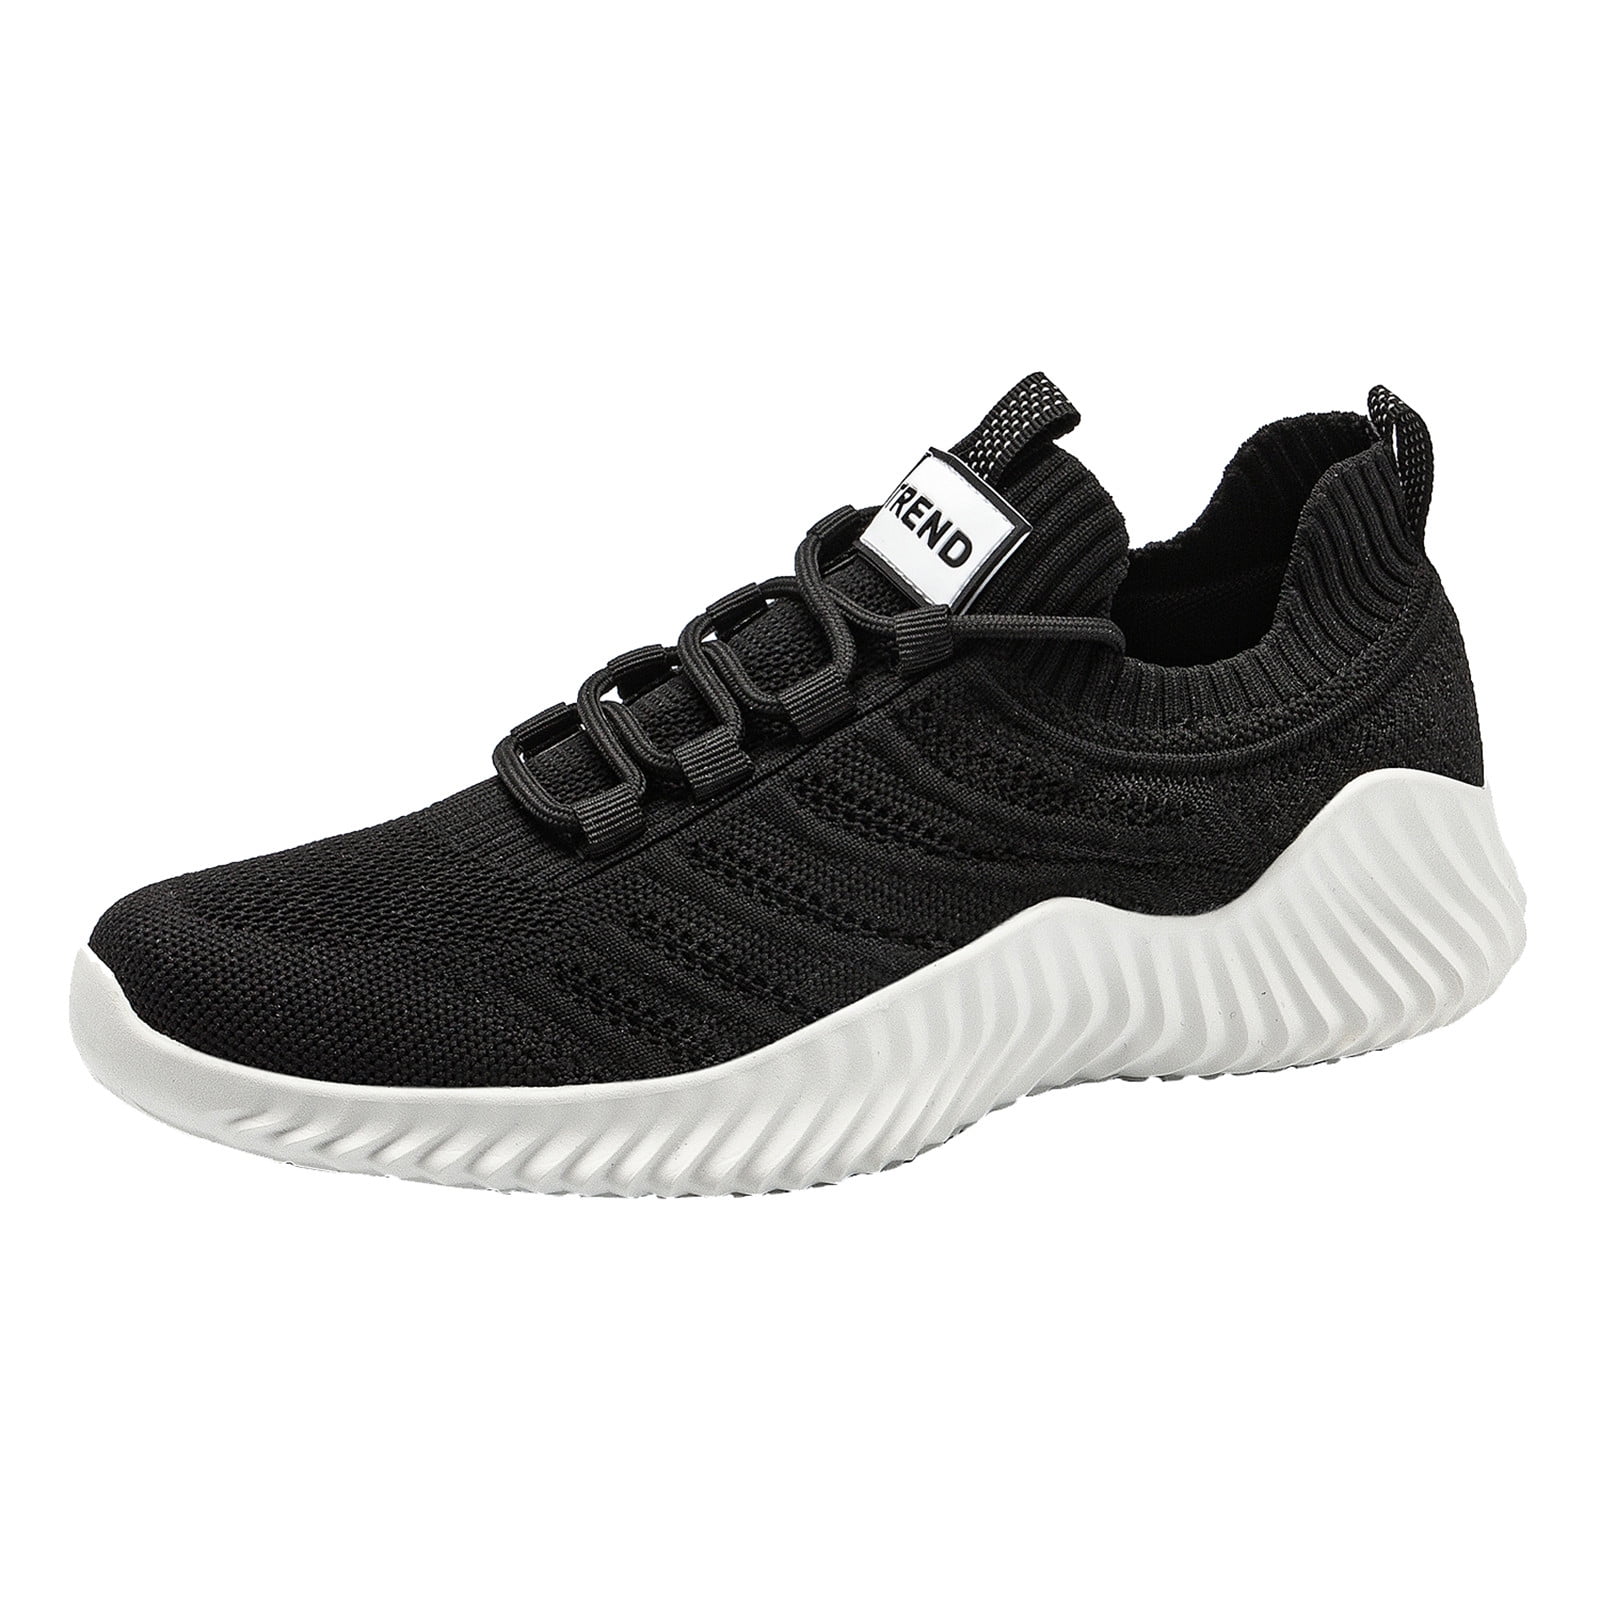 Shoes Black Size US 11.5/ UK 9.5/ EU 42 Walking Shoes Sneakers Lightweight Casual Gym Breathable Womens Mesh Sports Shoe